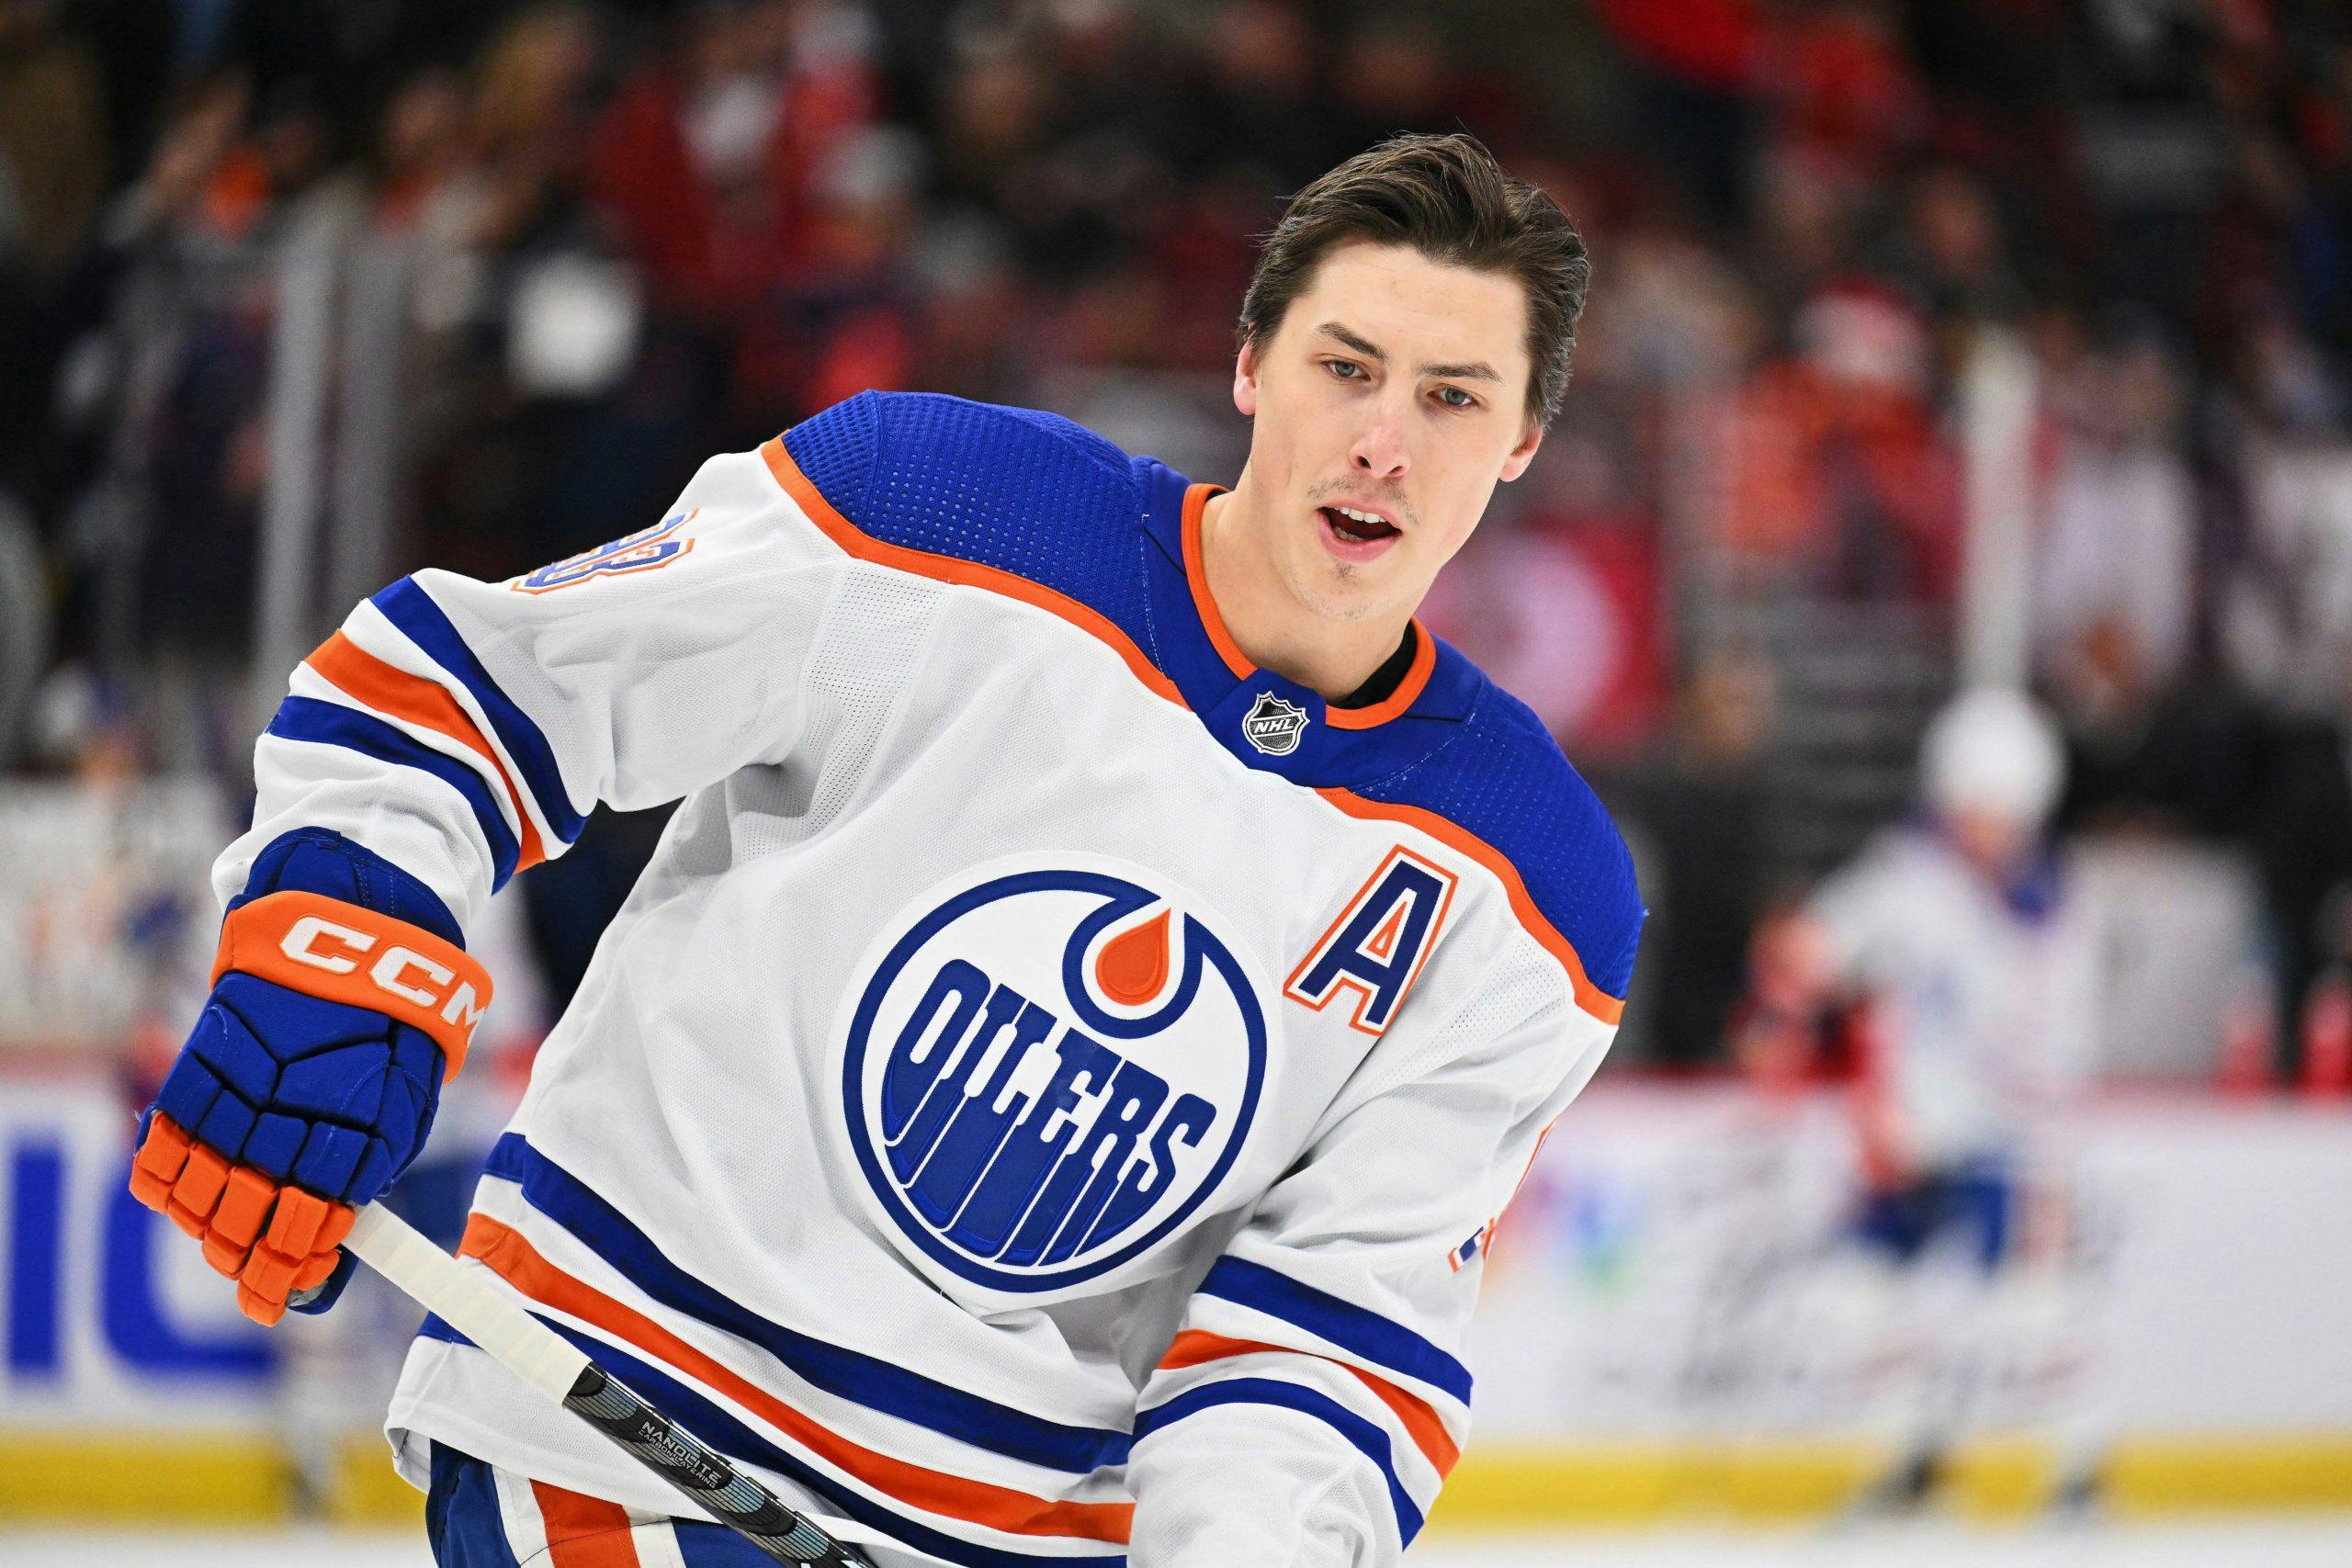 Face Off with CF Gala - Message from Honorary Chair, Ryan Nugent-Hopkins   Let's Go Oilers, Let's Go!! Our Honorary Chair, Ryan Nugent-Hopkins and the  Edmonton Oilers are heading into Game 4